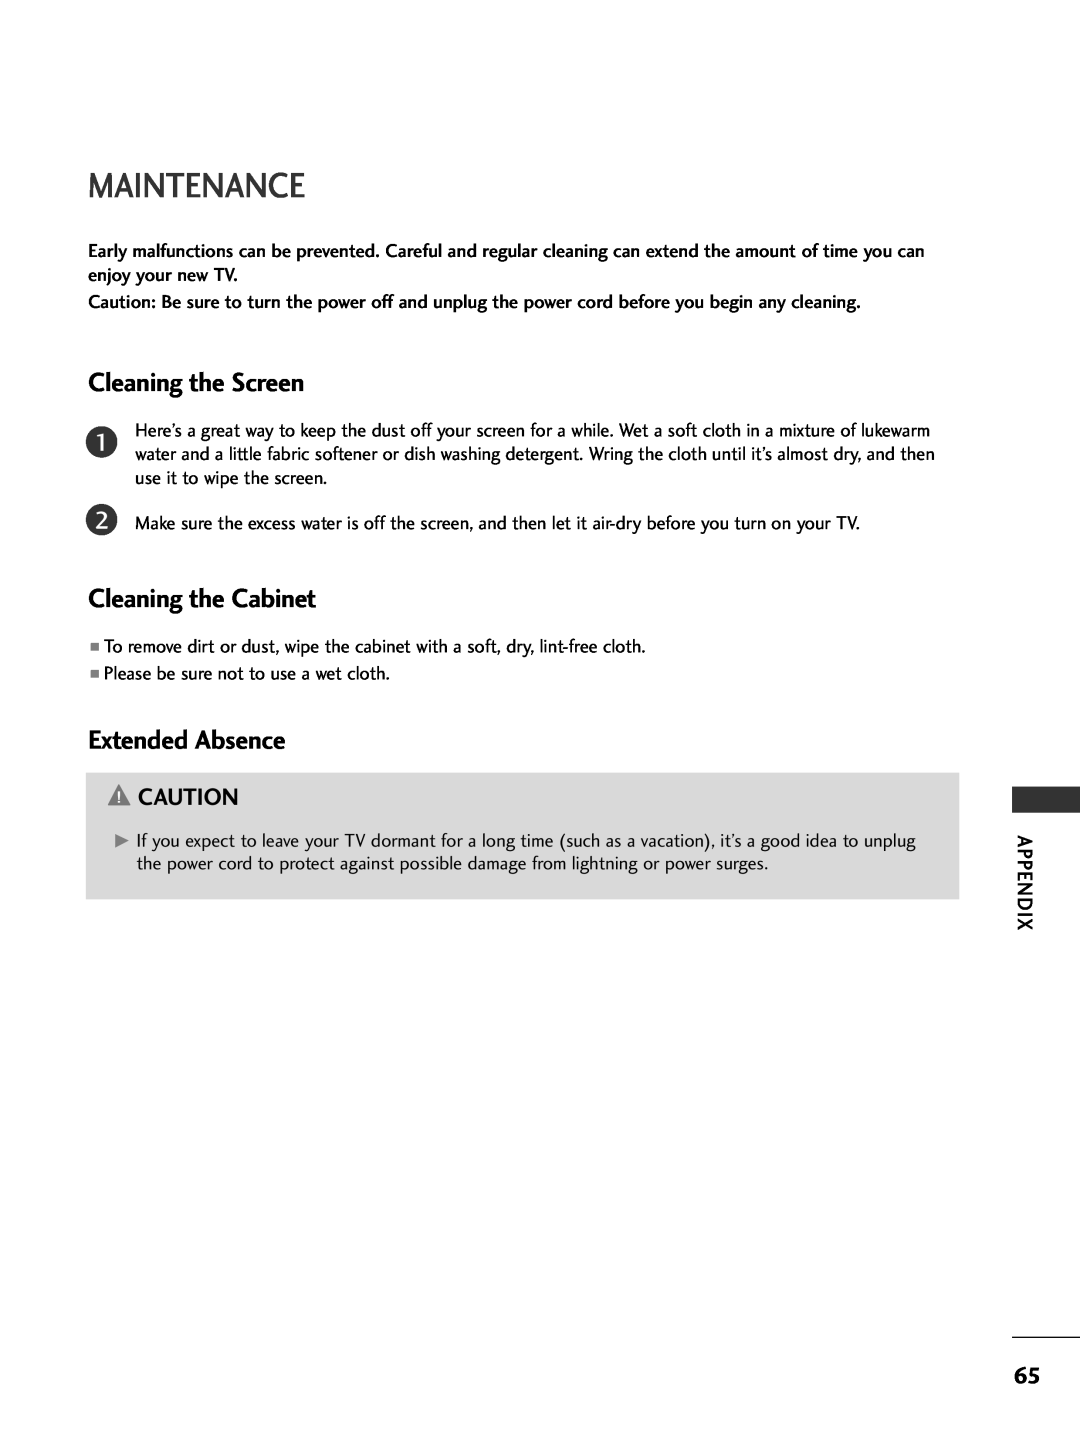 LG Electronics 32PC5DVC owner manual Maintenance, Cleaning the Screen, Cleaning the Cabinet, Extended Absence 